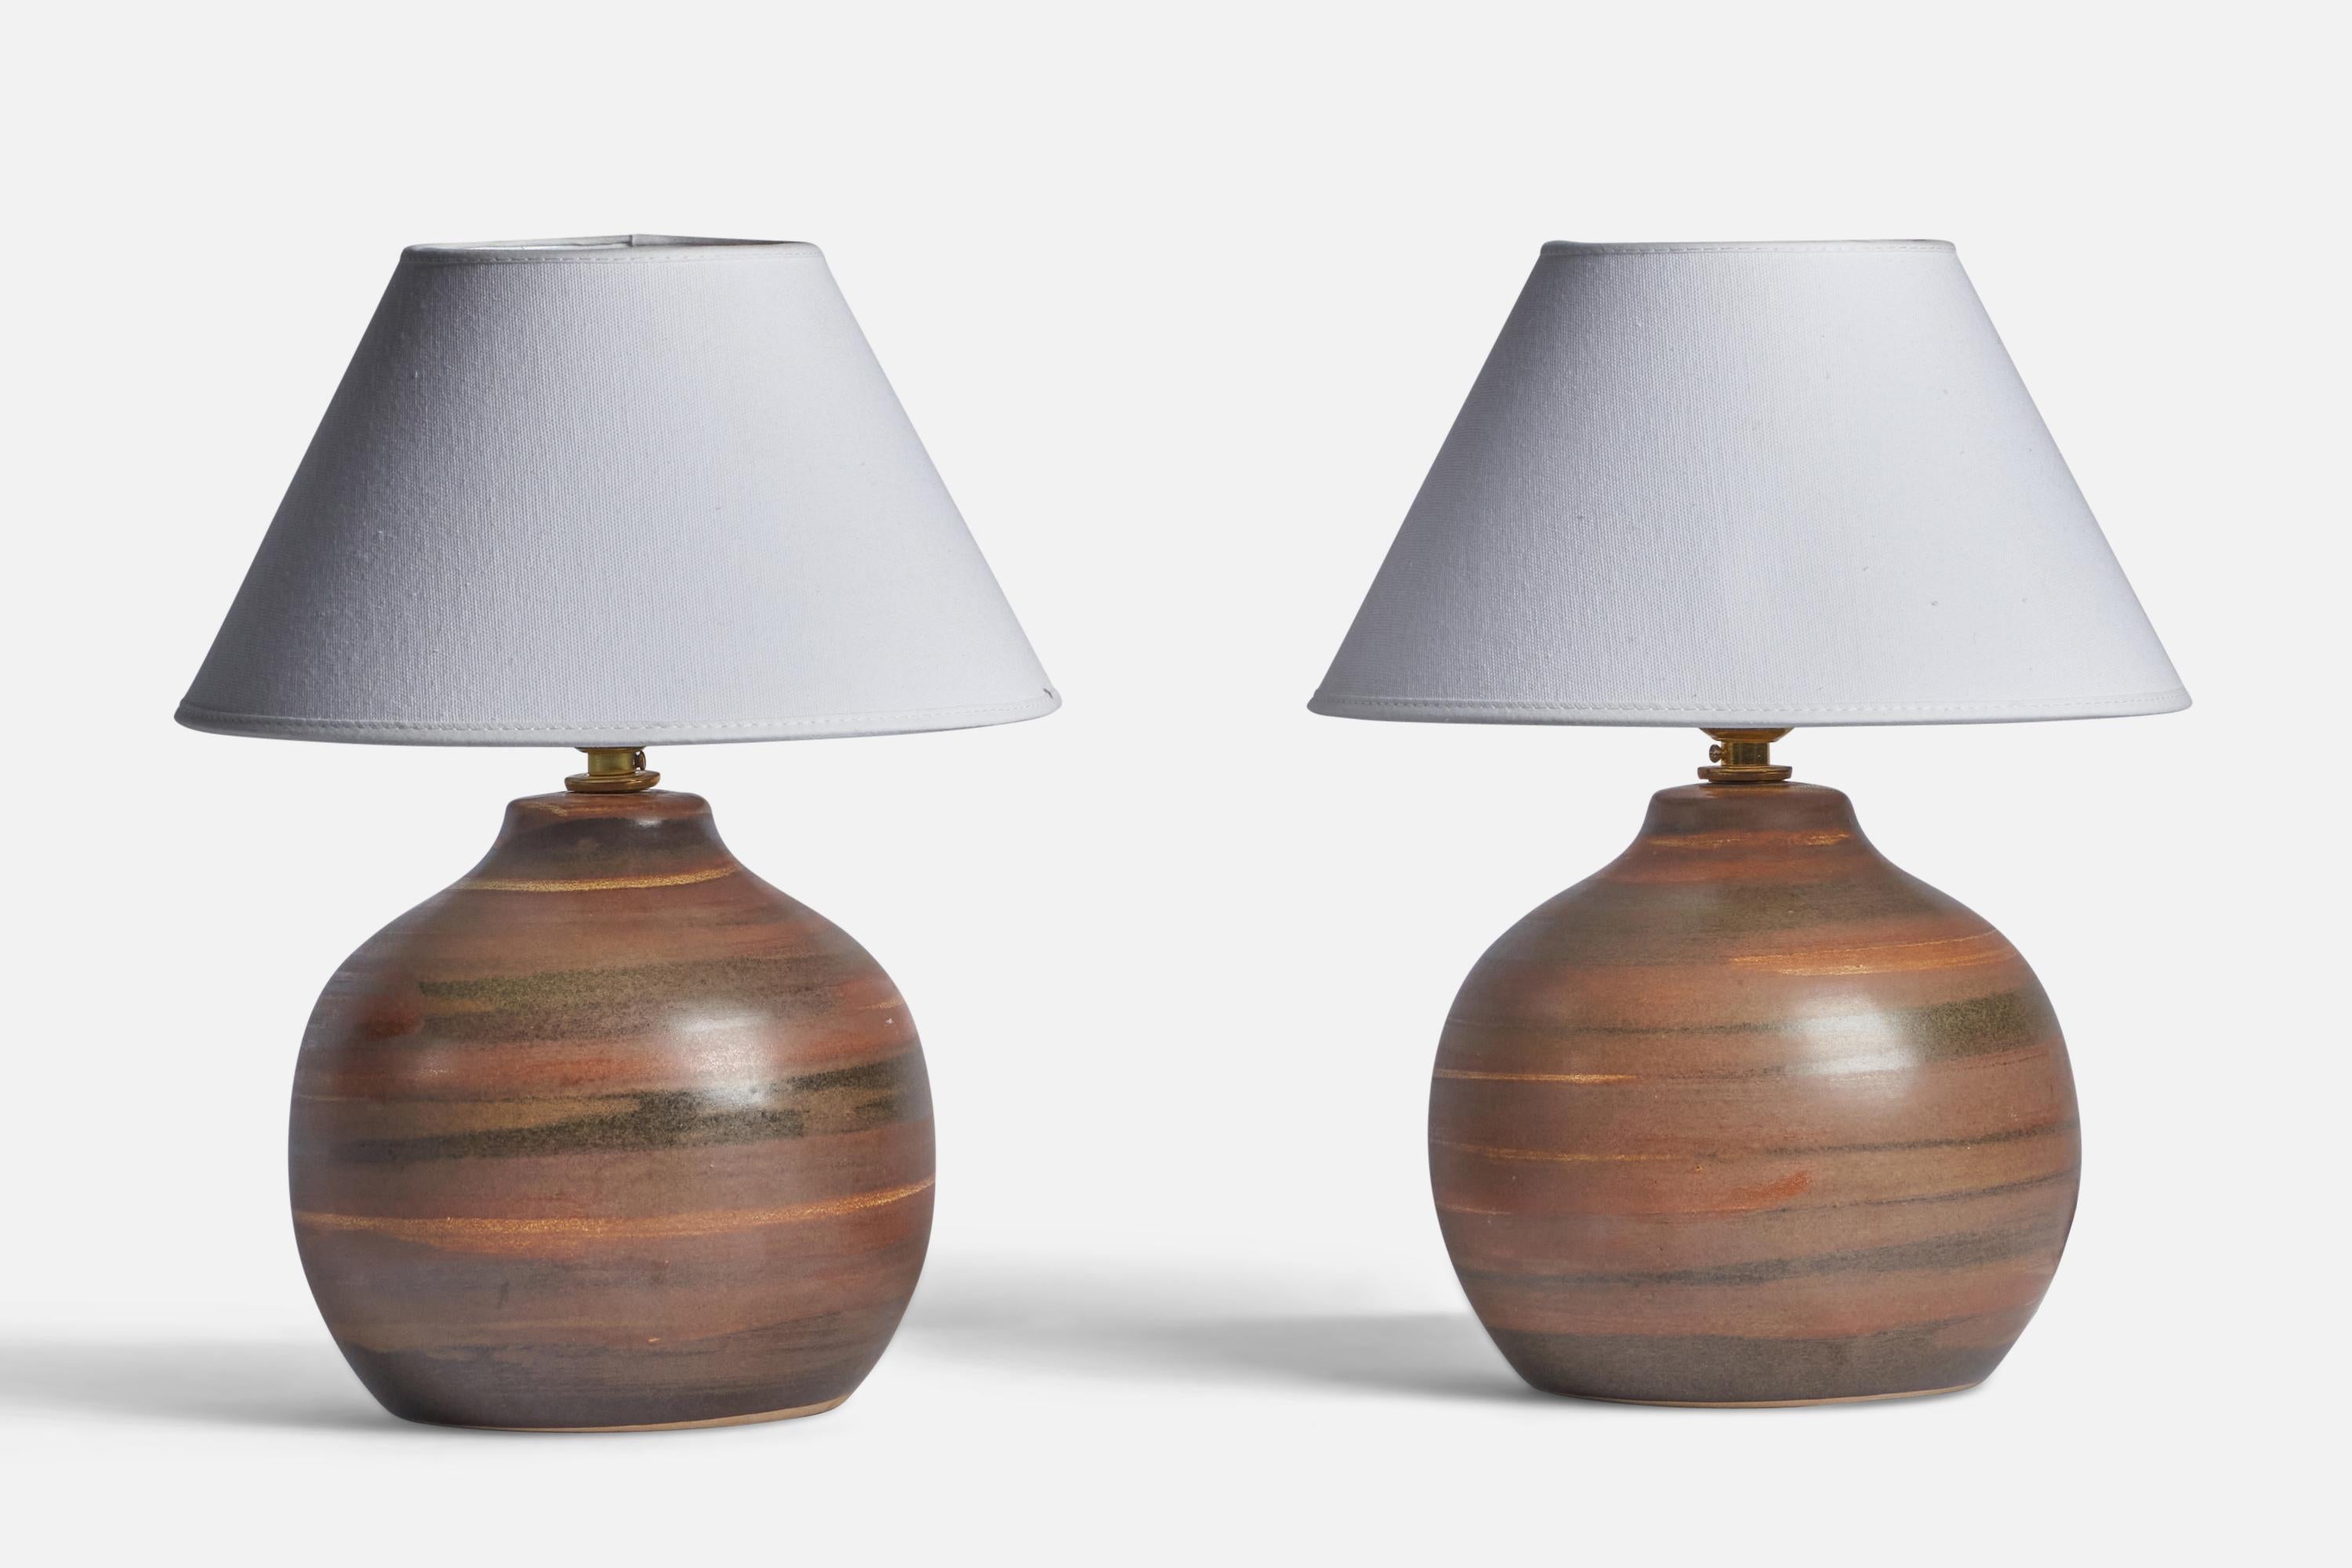 A pair of brown-glazed ceramic table lamps designed by Jane & Gordon Martz and produced by Marshall Studios, USA, 1960s.

Dimensions of Lamp (inches): 9.75” H x 7.25” Diameter
Dimensions of Shade (inches): 4.5” Top Diameter x 10” Bottom Diameter x